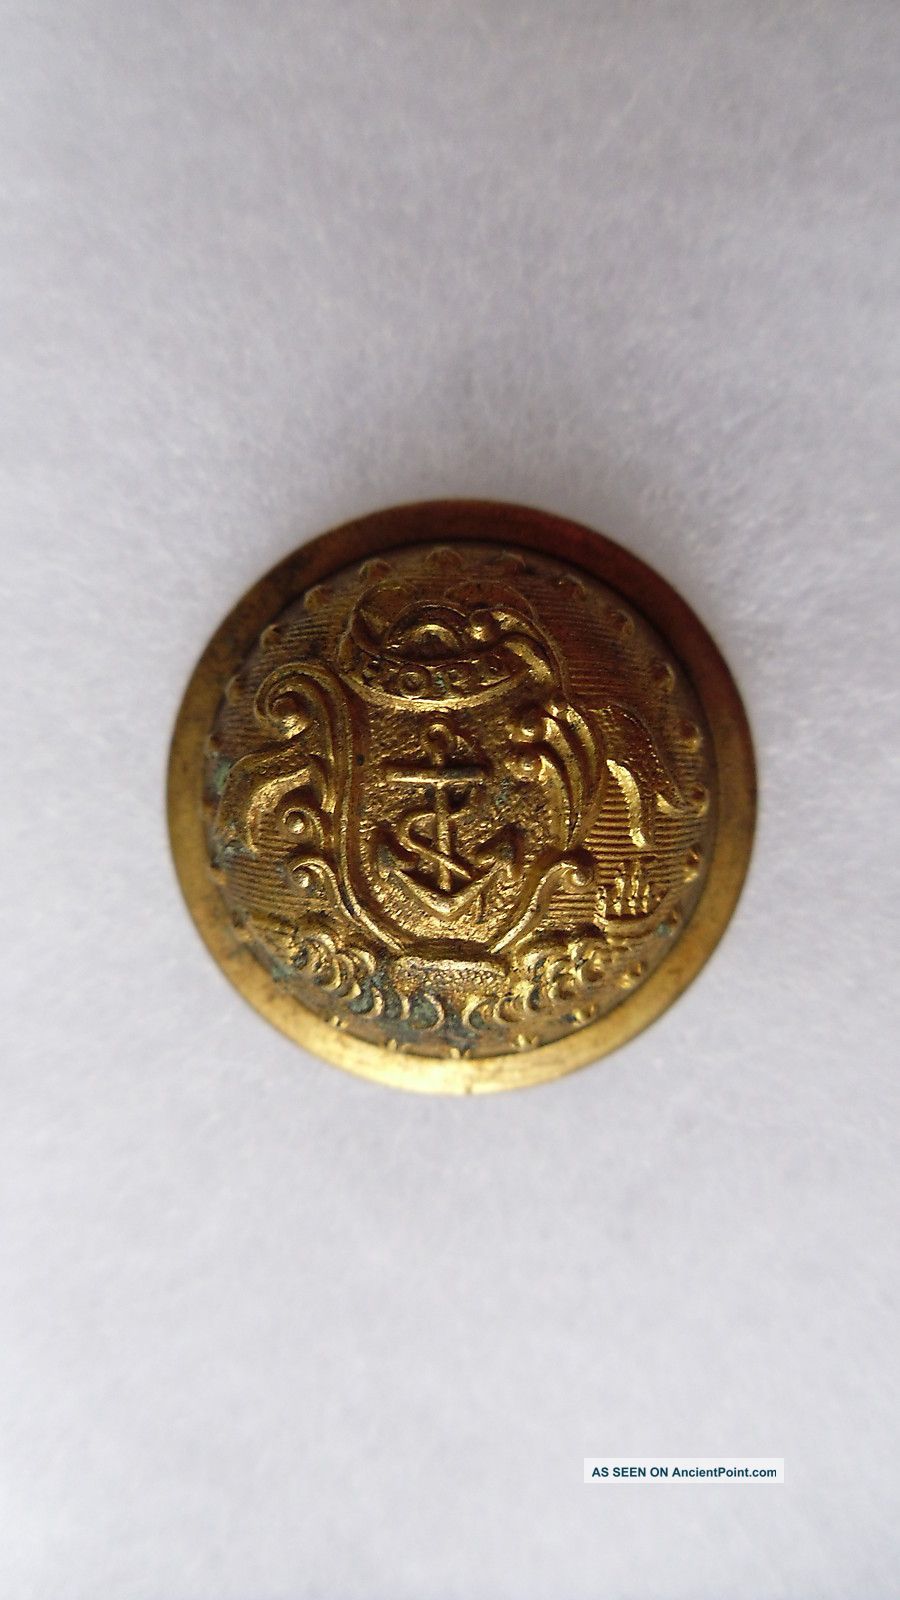 Antique Rhode Island State Seal Coat Button Scovill Mfg Co Waterbury 23 Mm Buttons photo